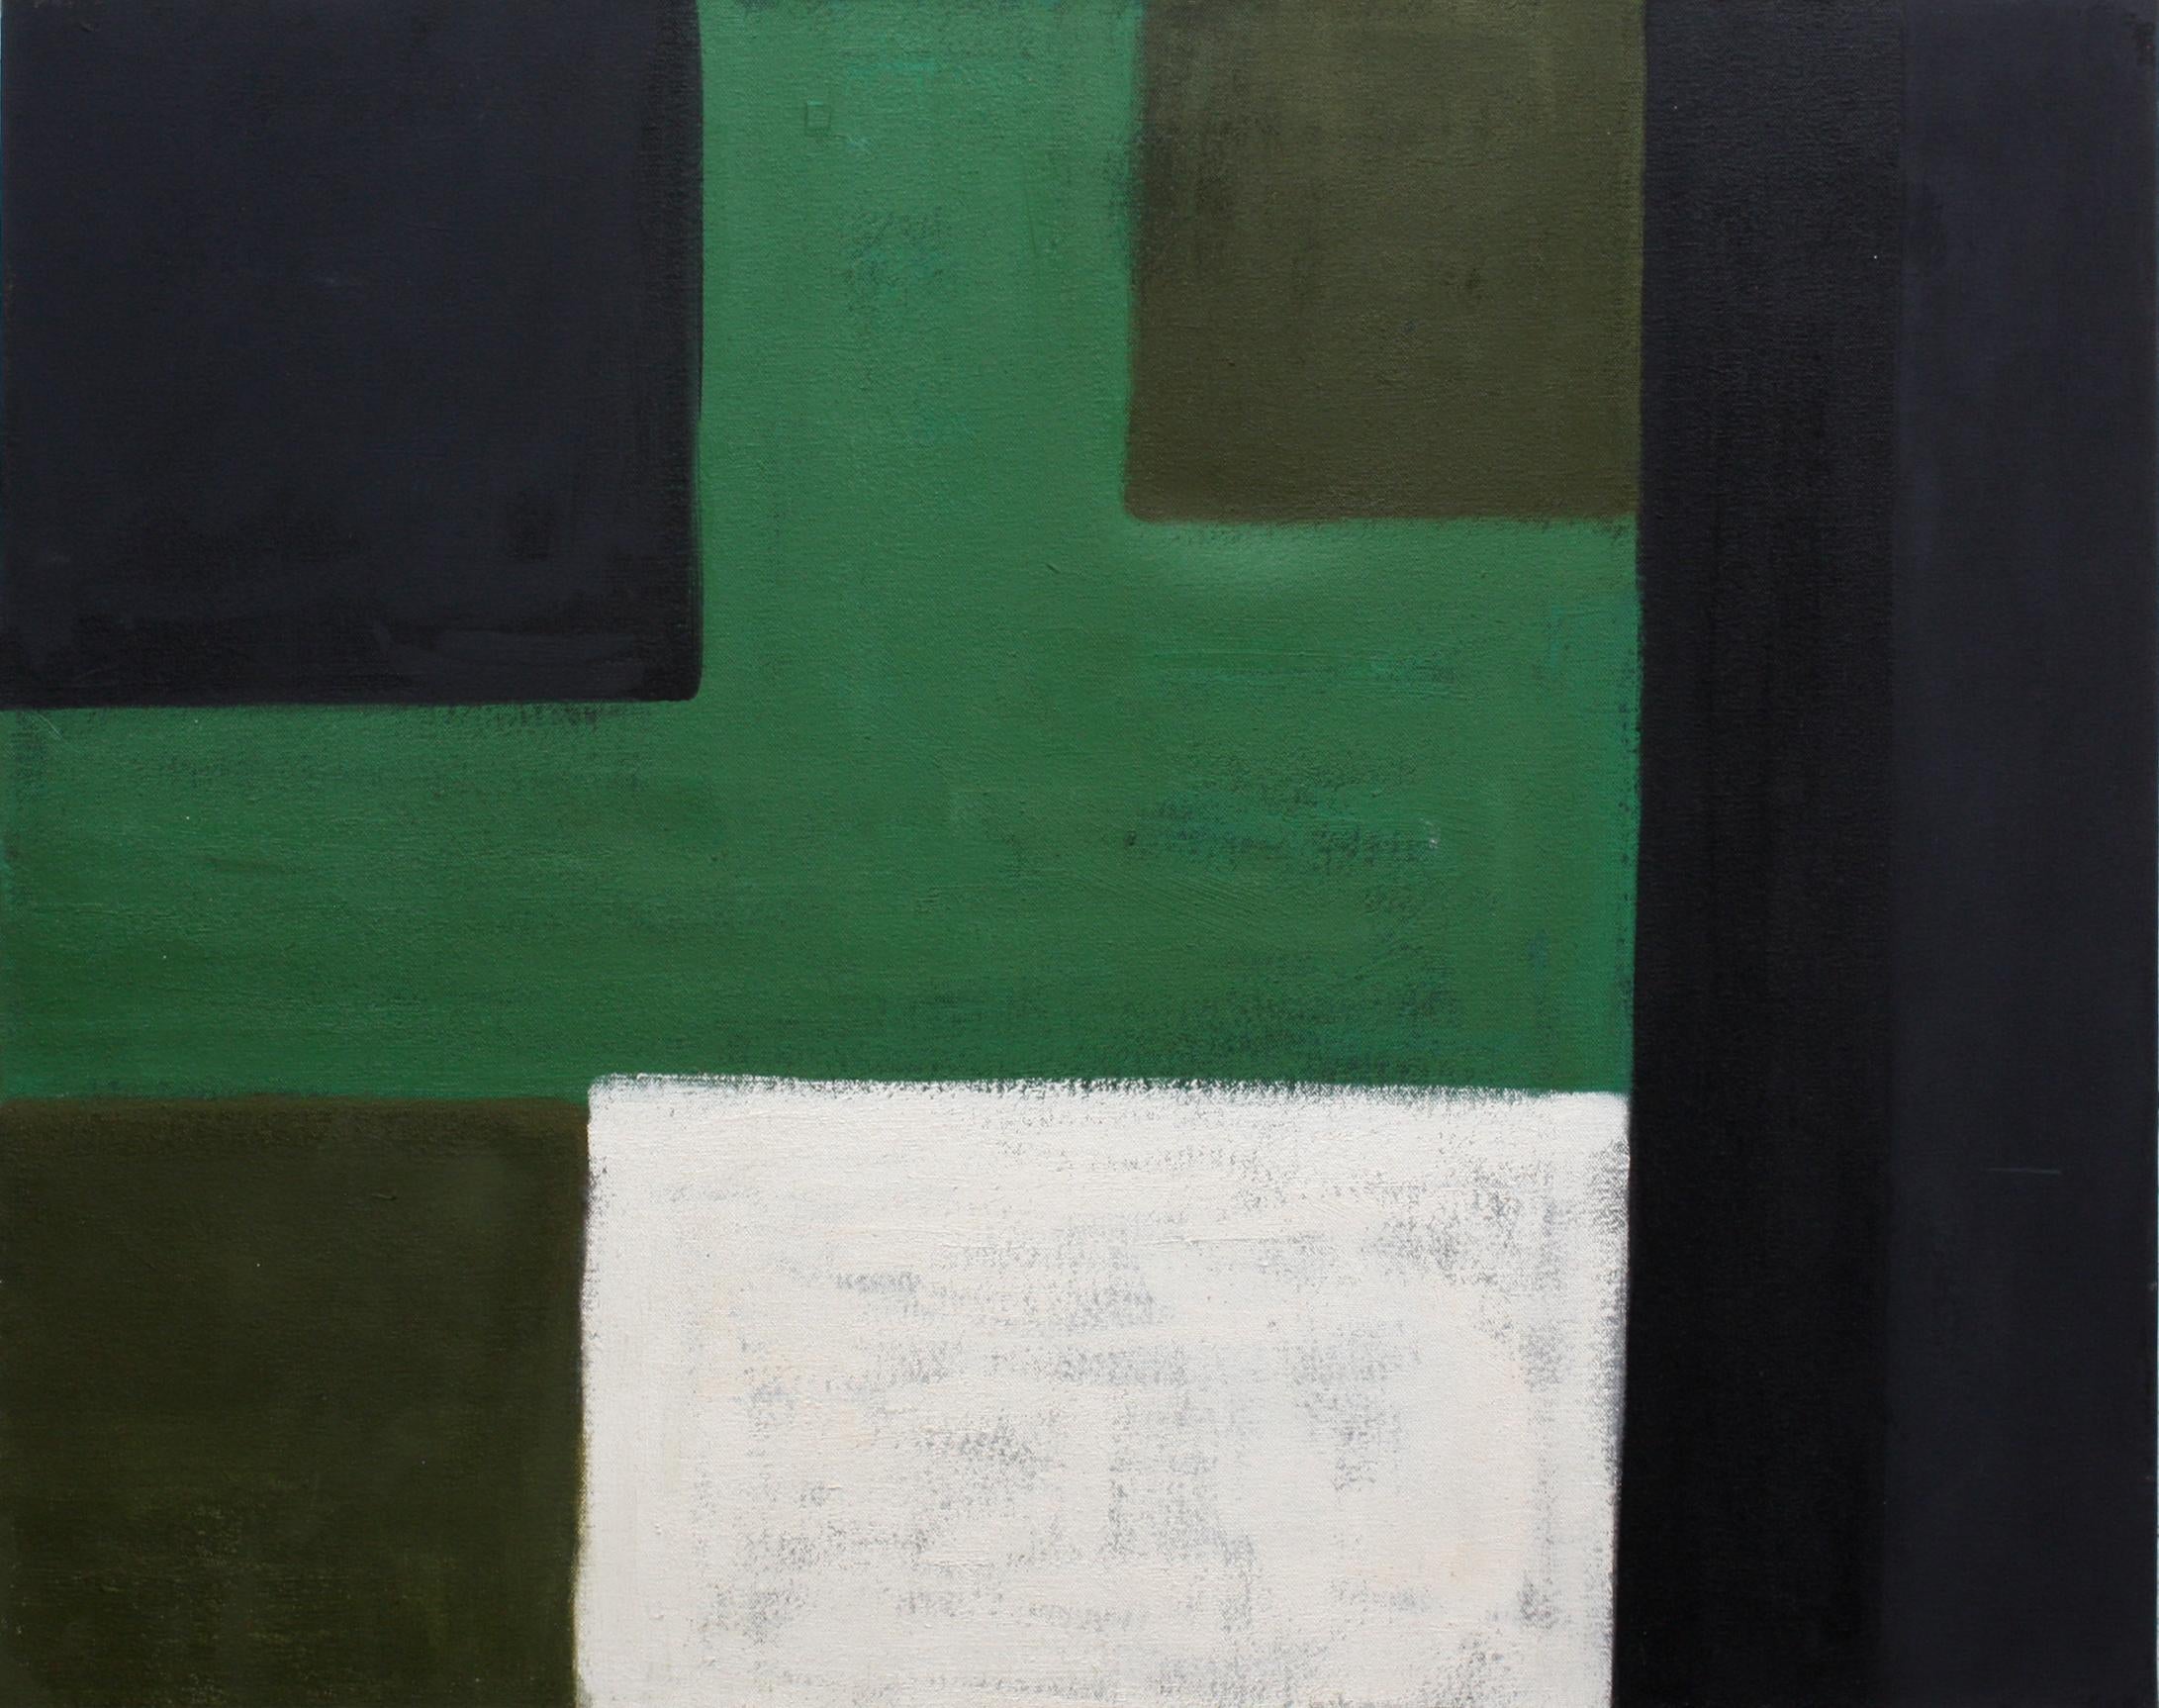 Christopher Engel Abstract Painting - Green, Black, White (Abstract Geometric Painting in the Style of Hans Hofmann)